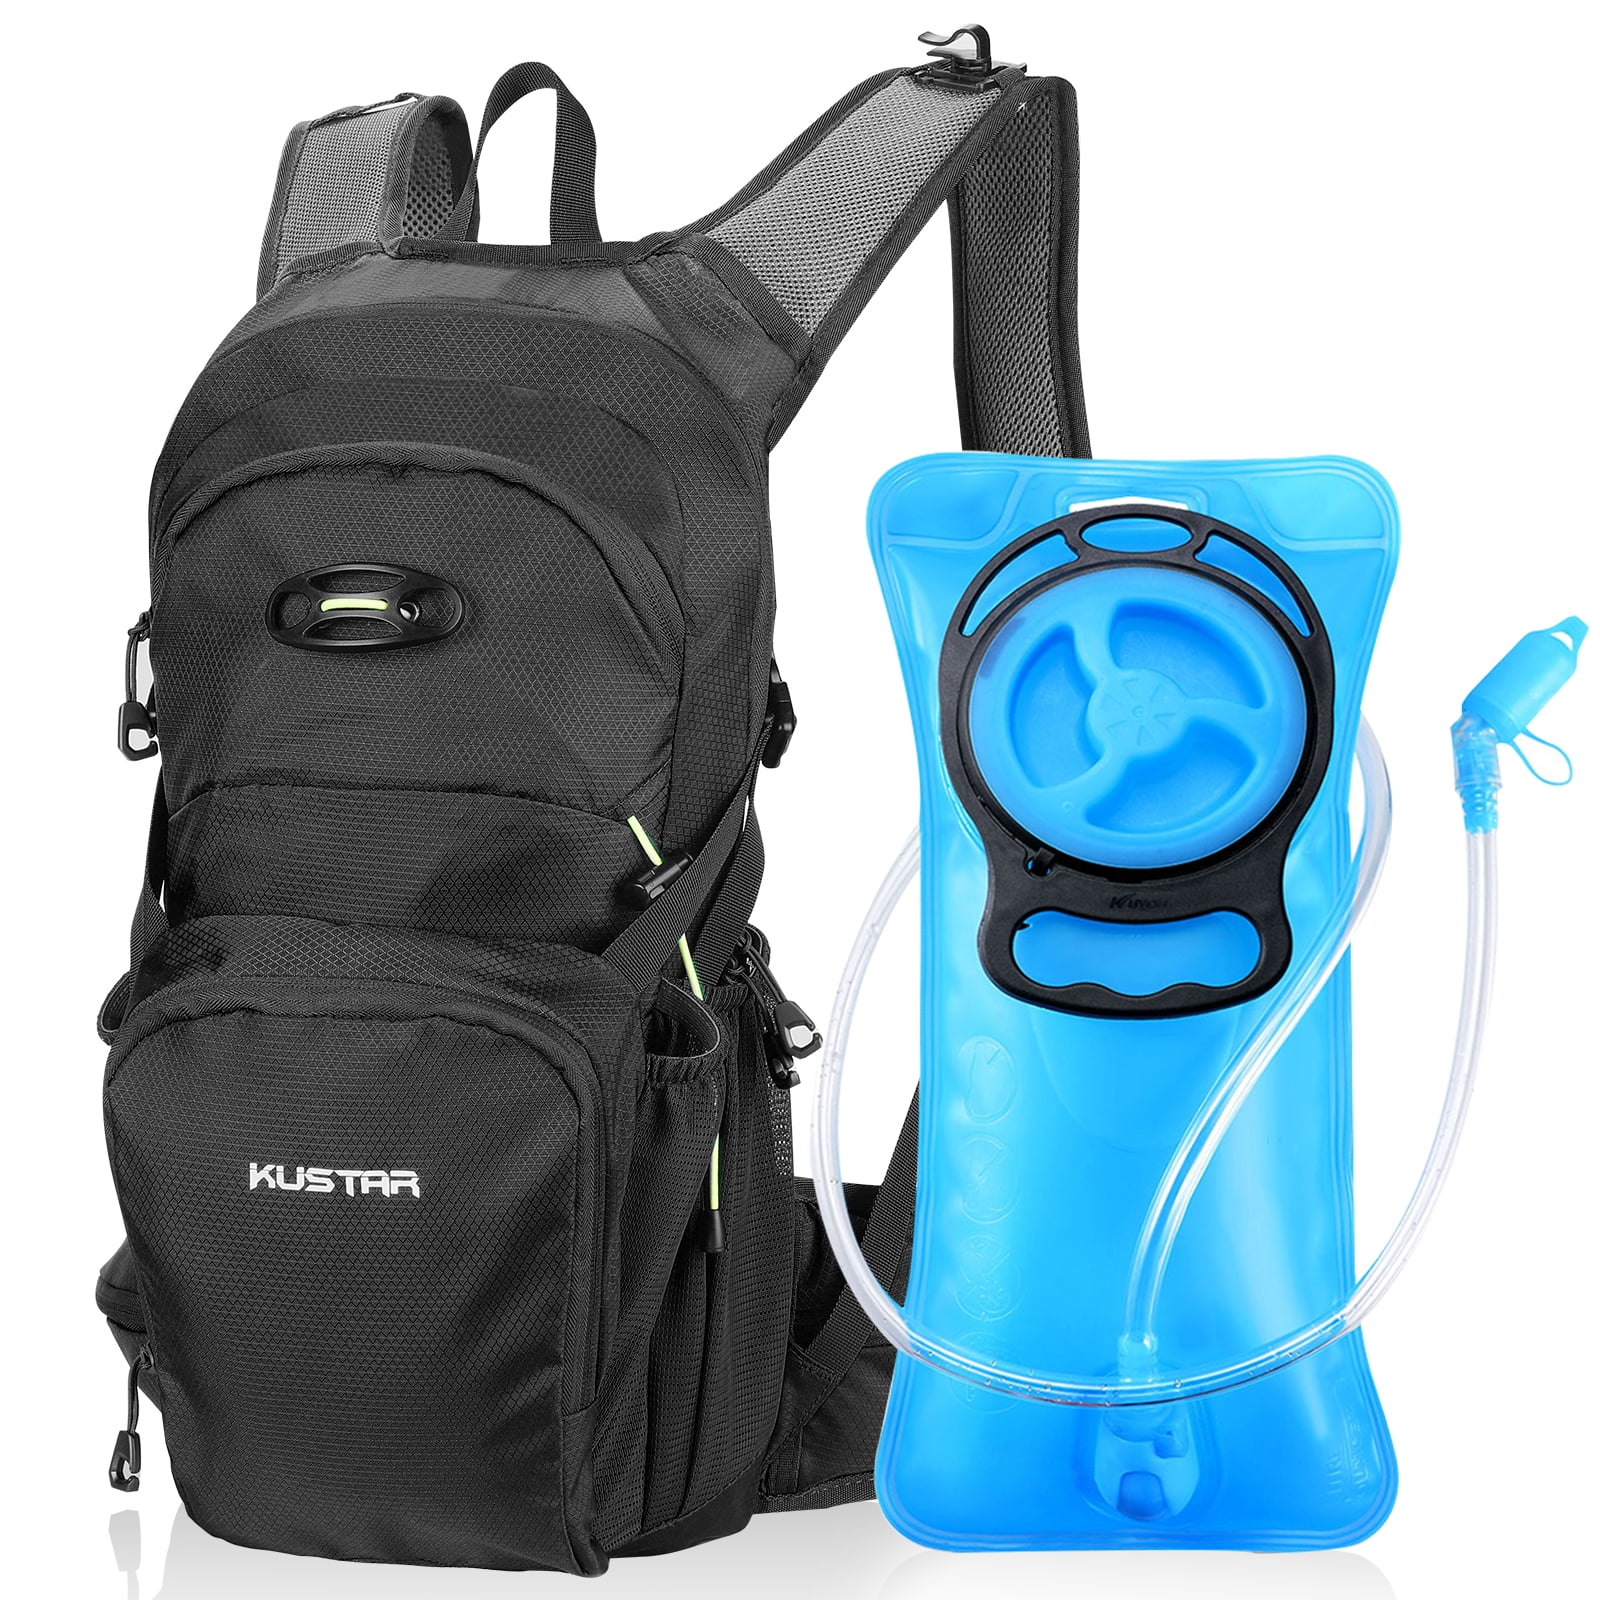 2 L Hydration Rucksack Pack Backpack With Water Bladder Bag Running Cycling UK 